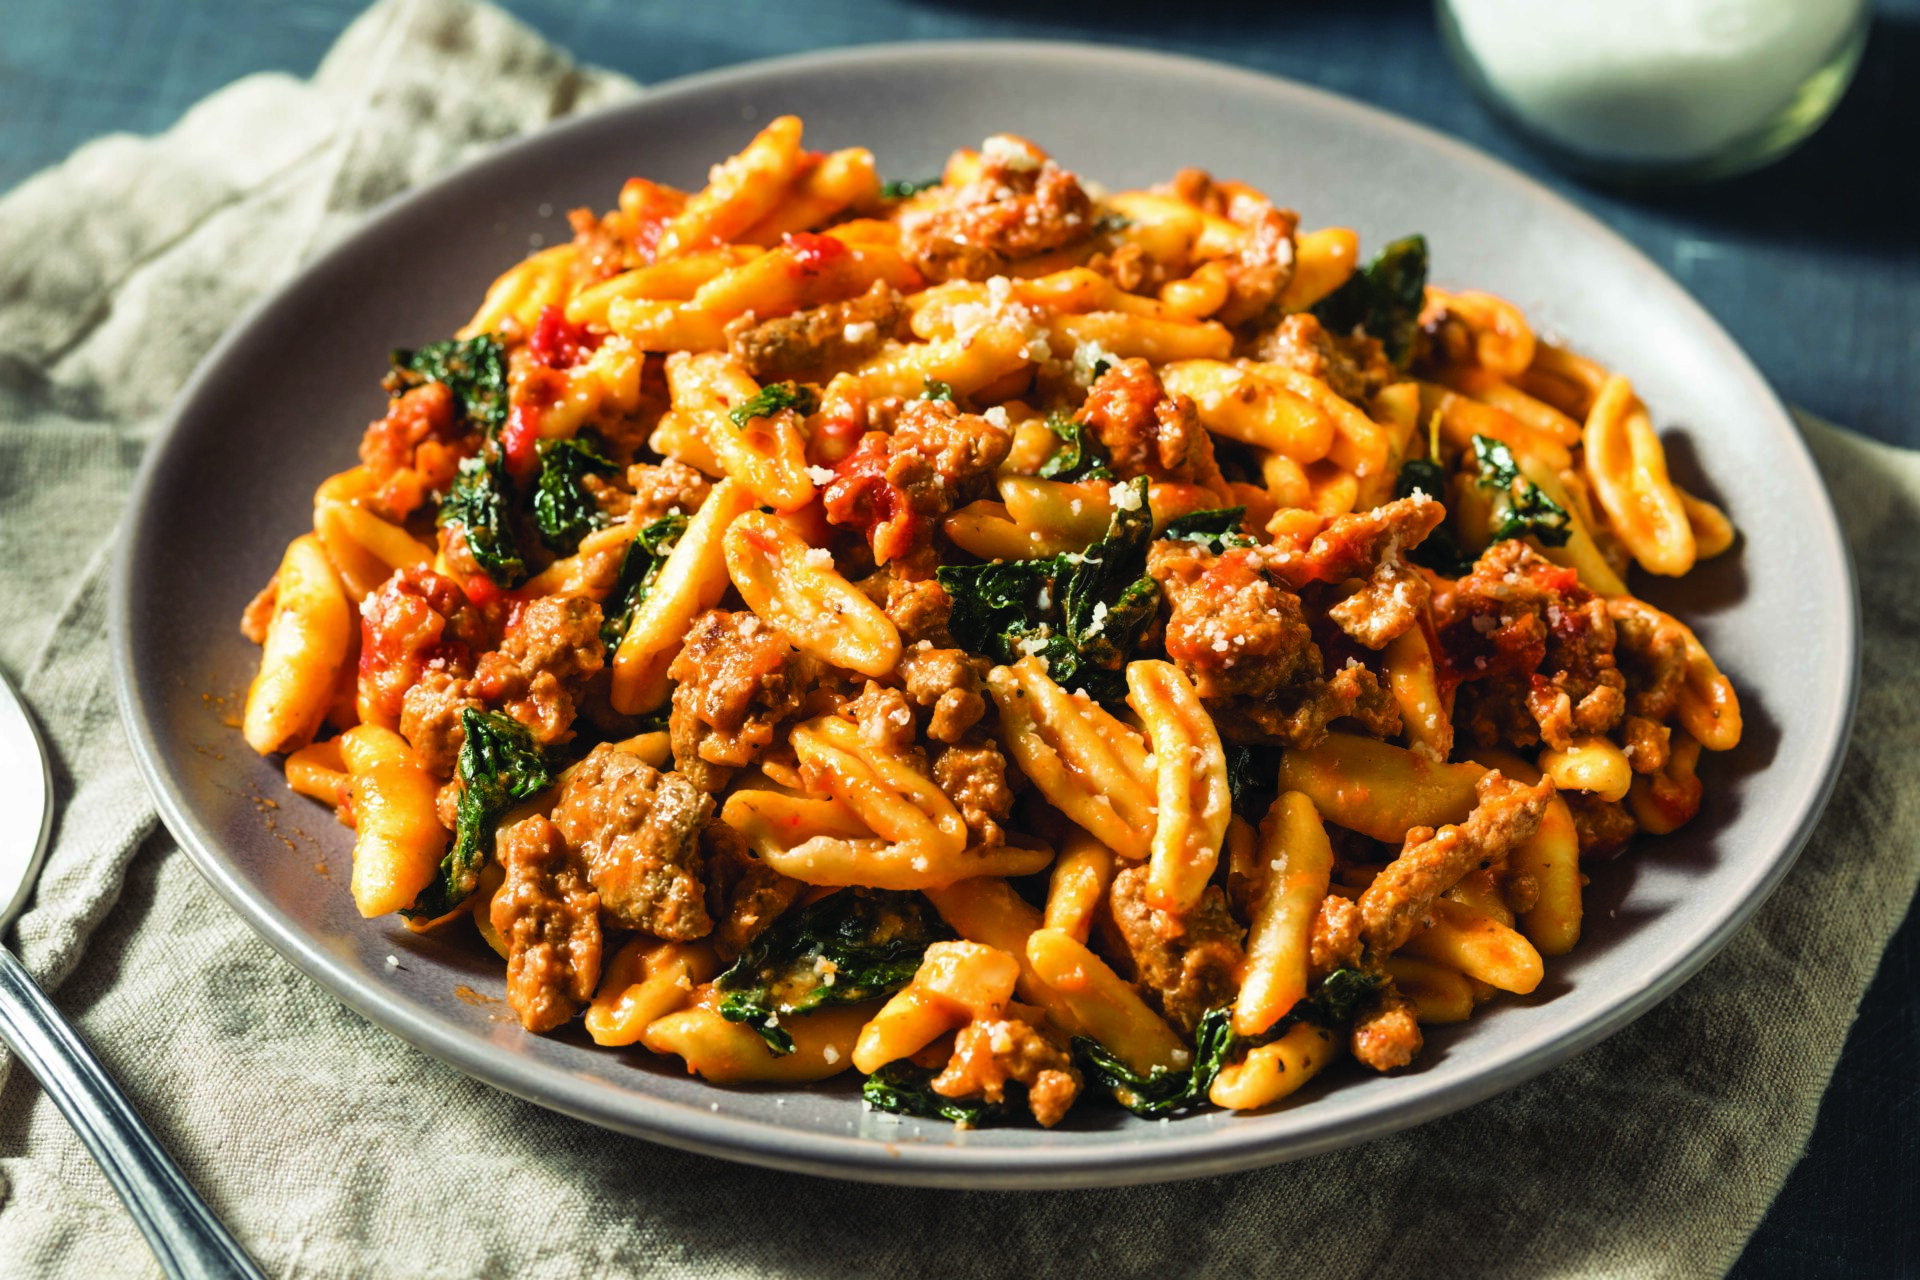 Homemade Cavatelli Pasta Dinner with Sausage and Spinach